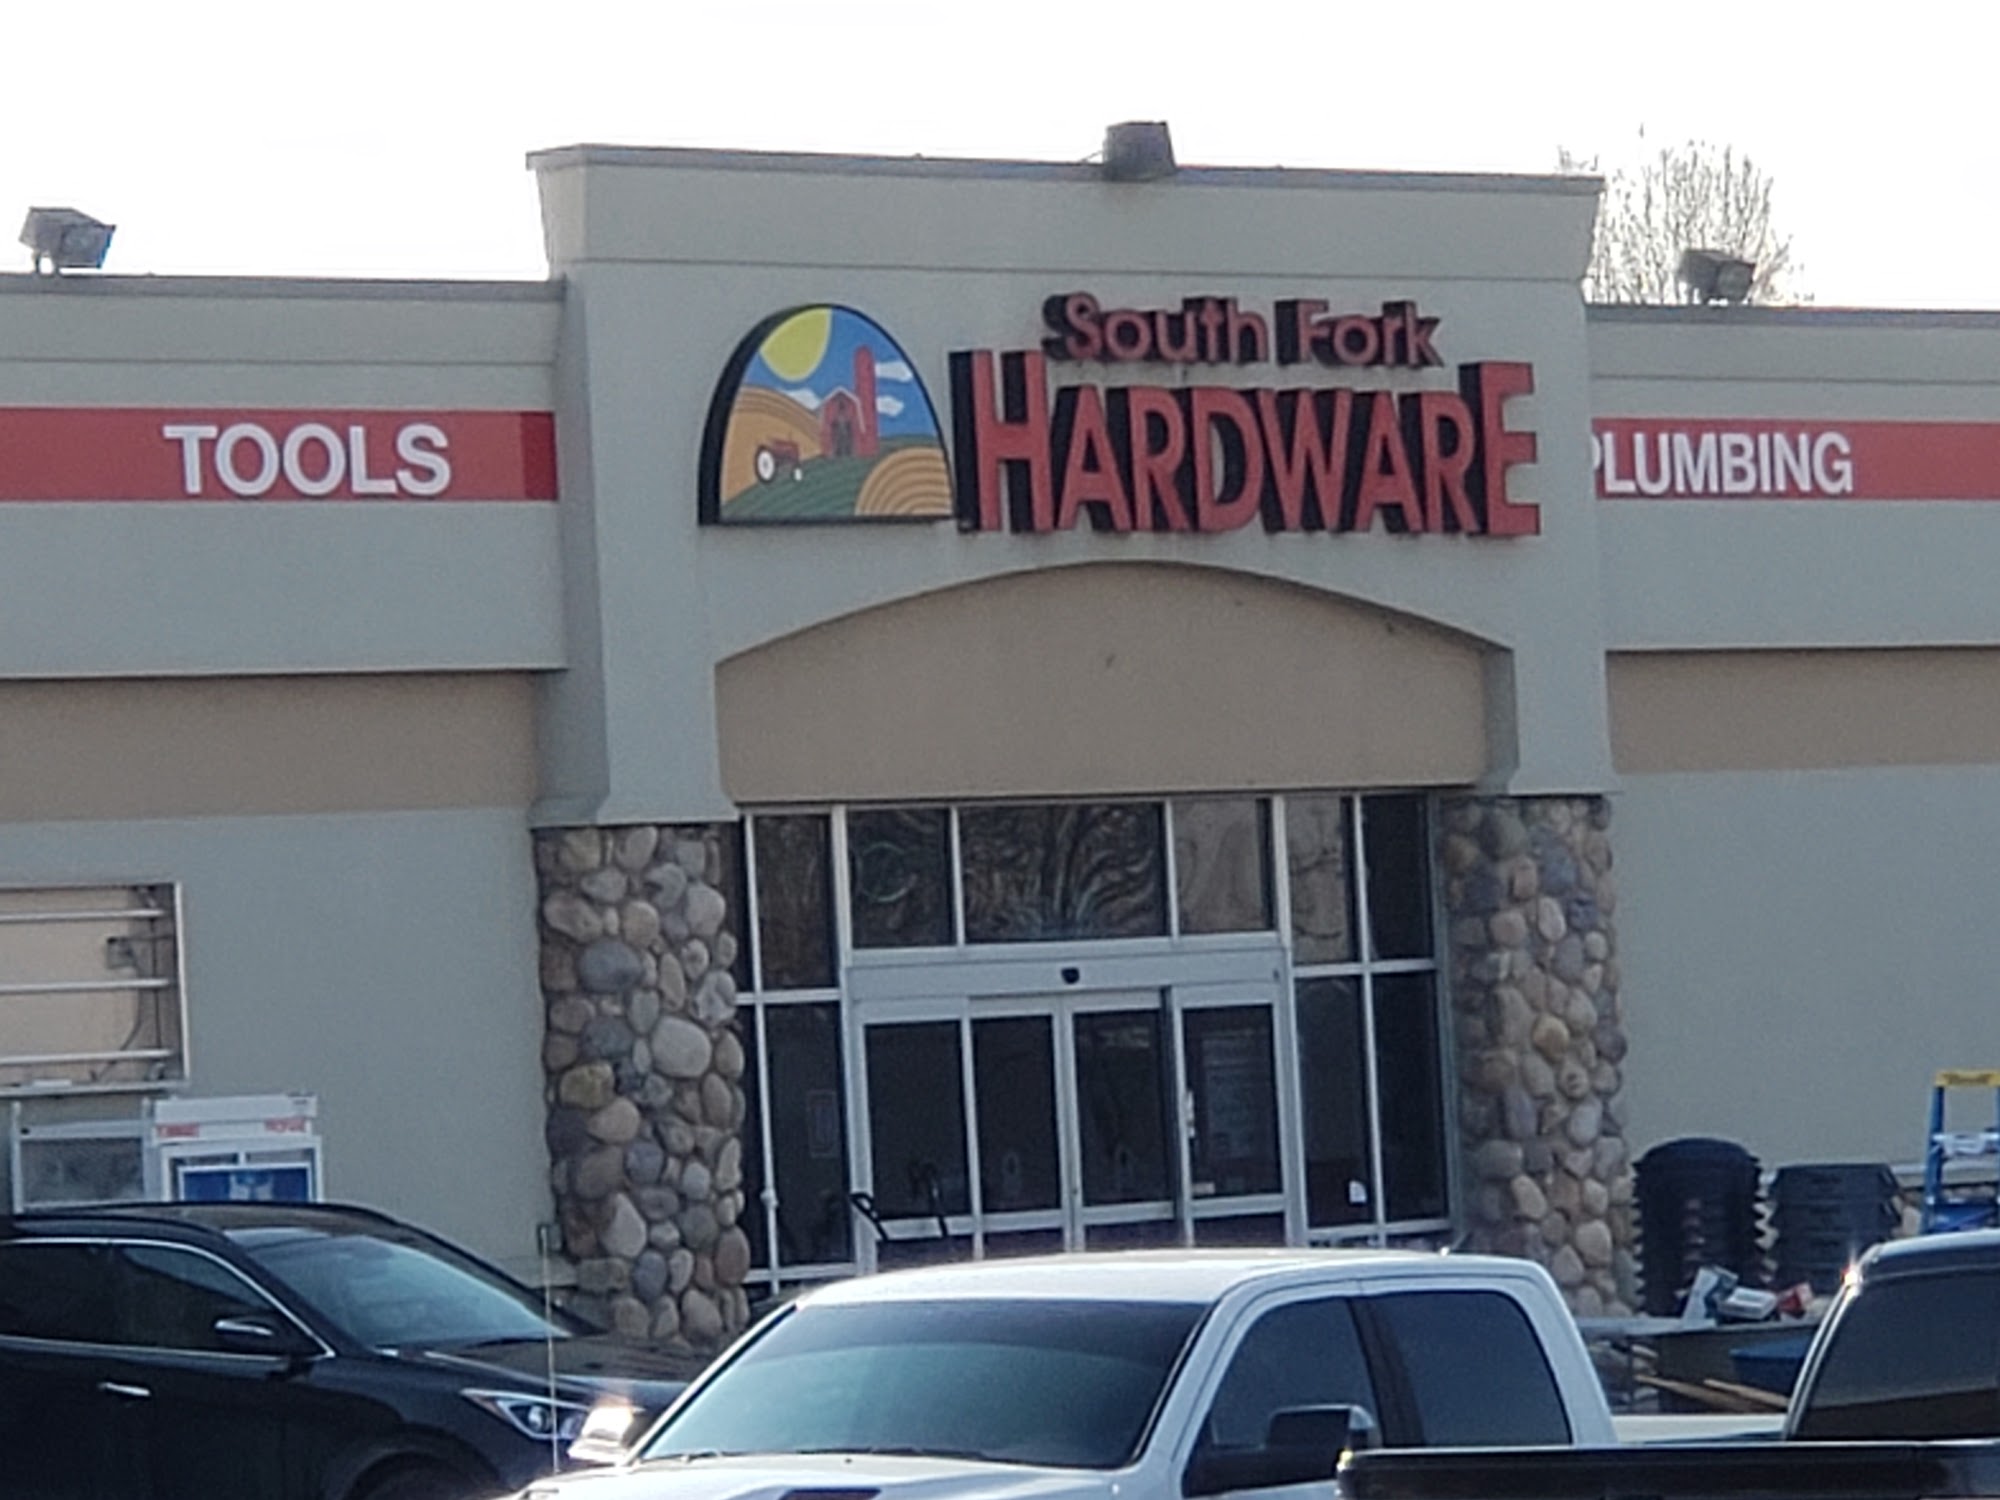 South Fork Hardware (not affiliated with Ace)